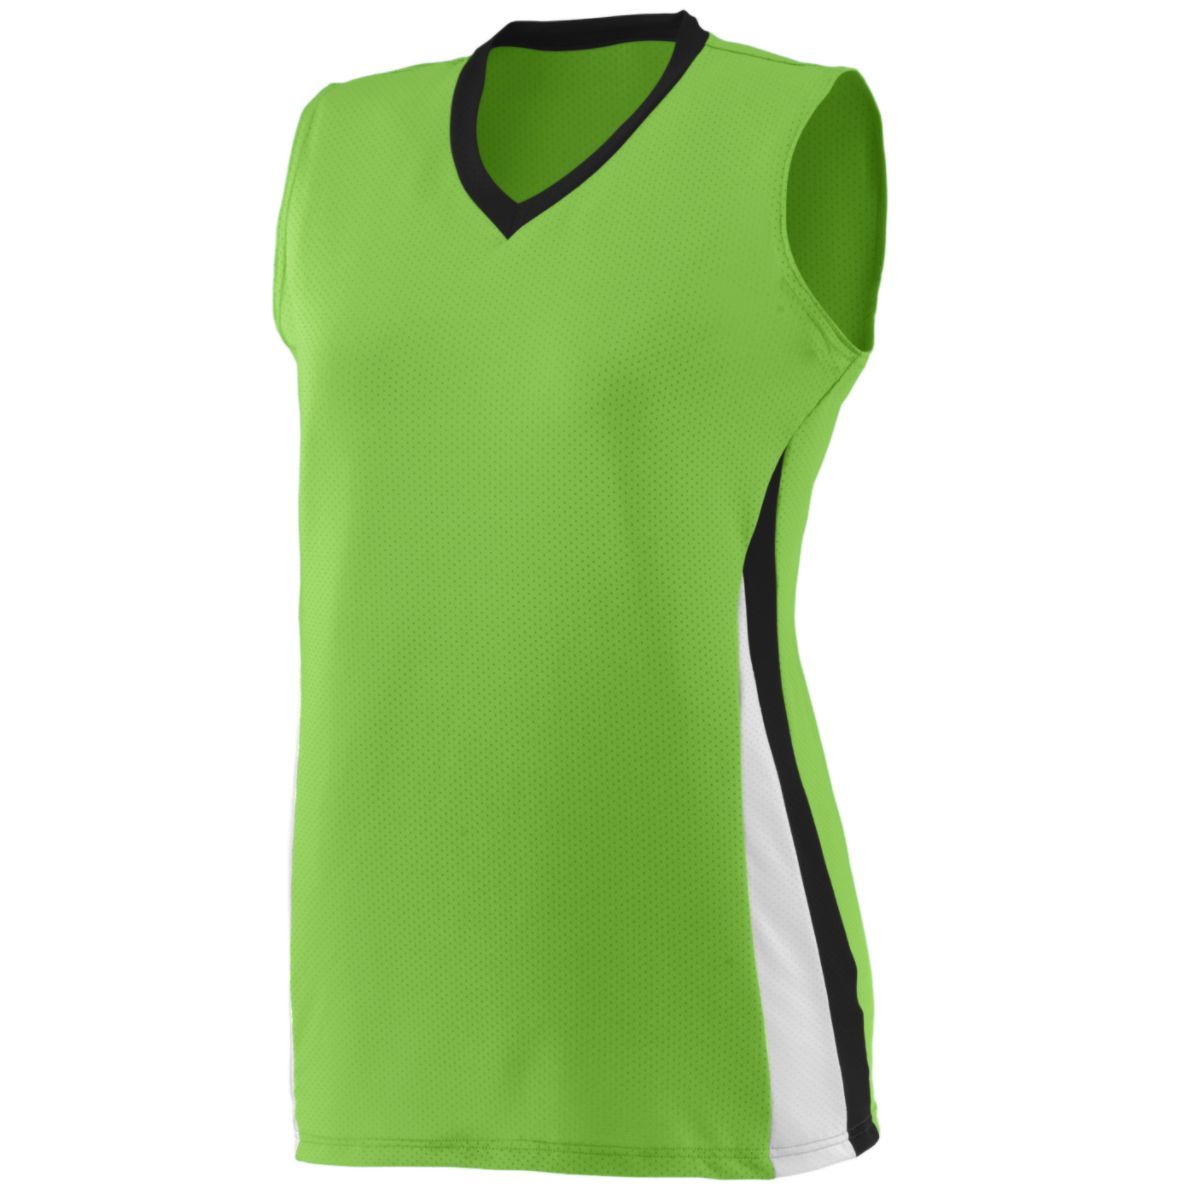 Augusta Sportswear Ladies Tornado Jersey in Lime/Black/White  -Part of the Ladies, Ladies-Jersey, Augusta-Products, Volleyball, Shirts product lines at KanaleyCreations.com